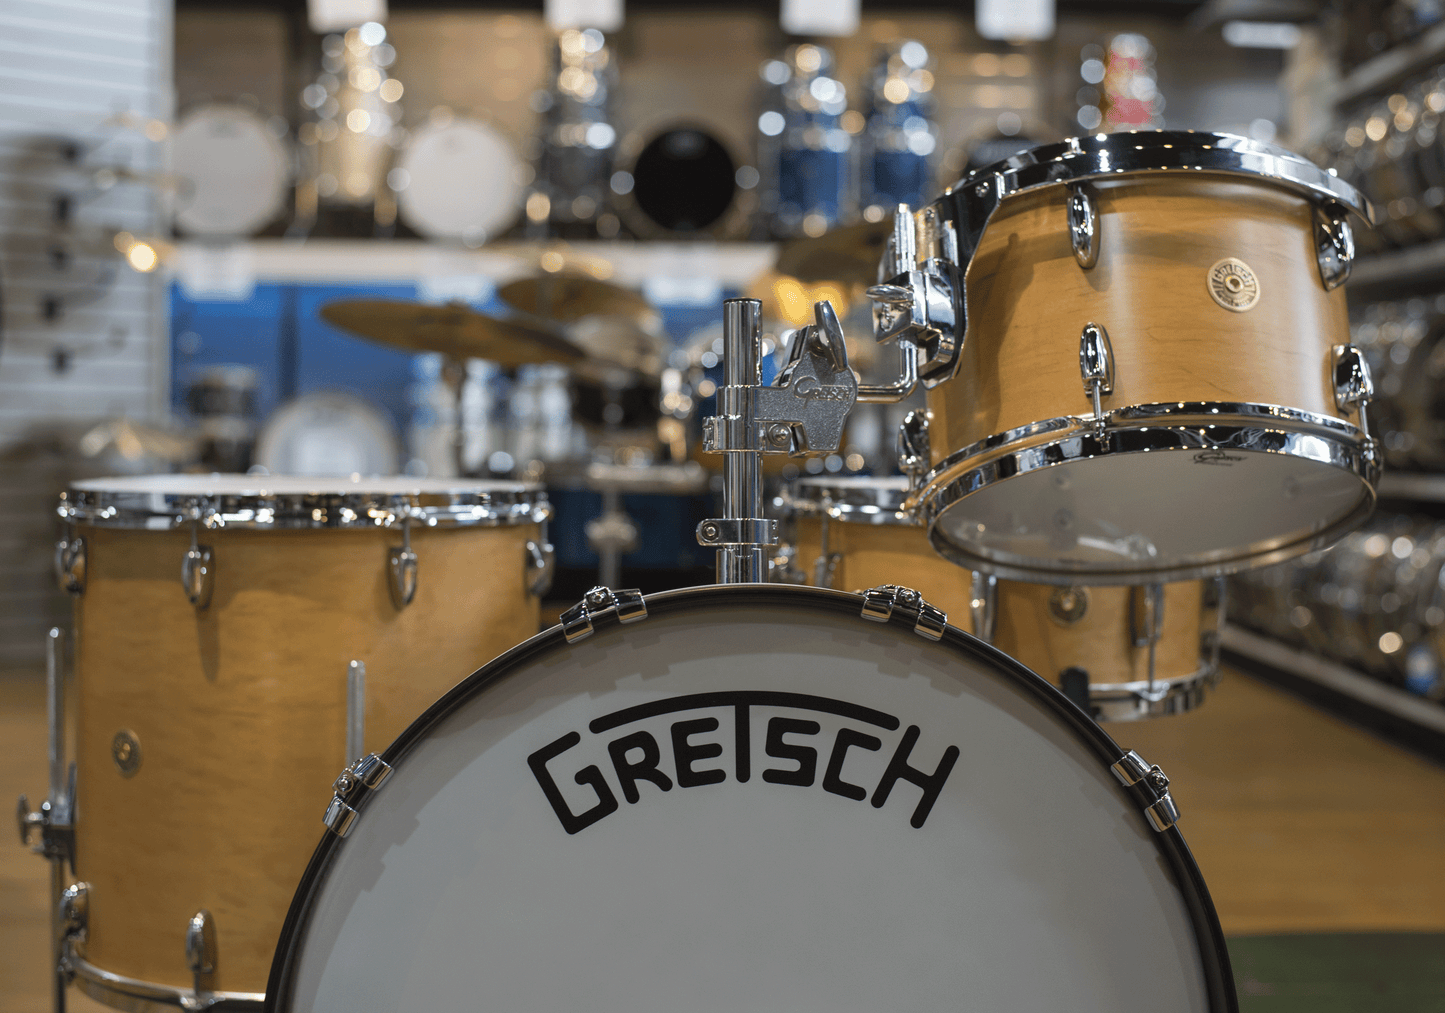 Gretsch Broadkaster 4pc Drum Kit in Satin Classic Maple (GKSL4PCTCST)